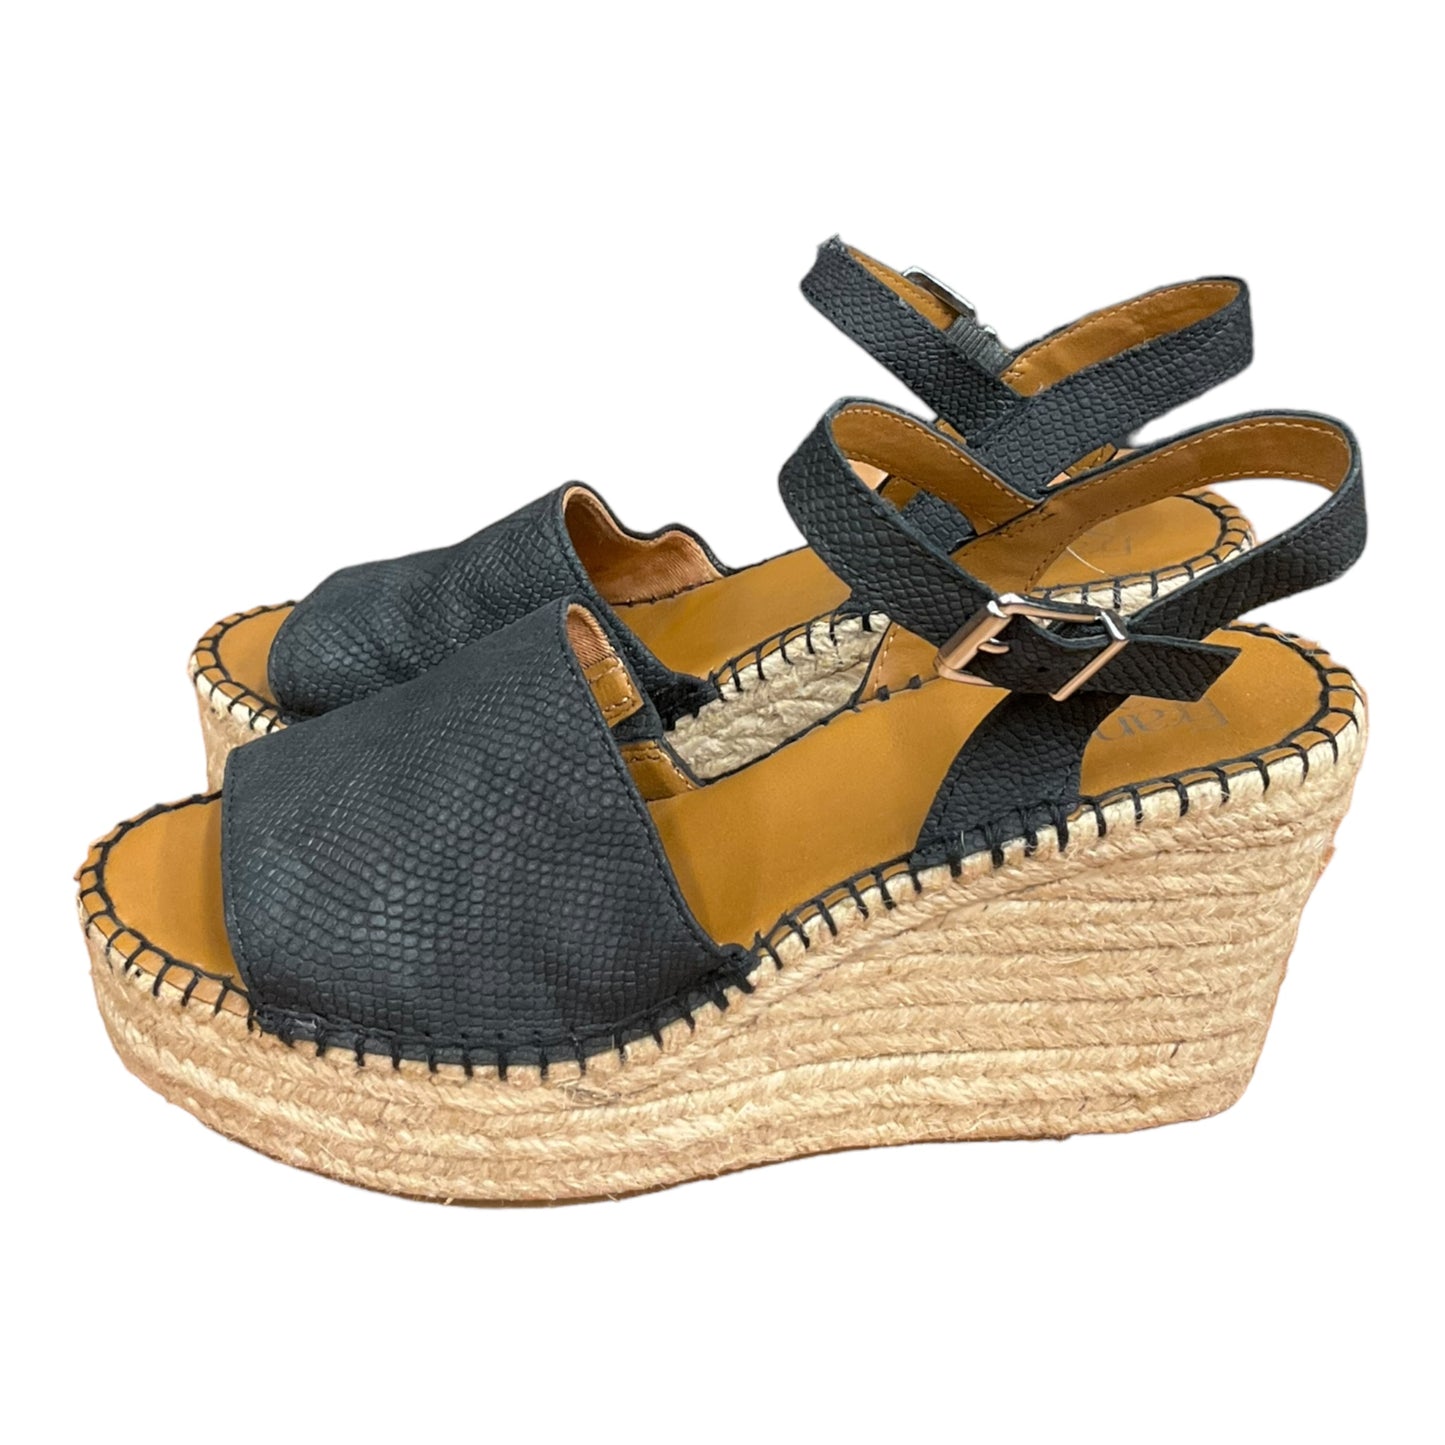 Shoes Heels Espadrille Wedge By Franco Sarto  Size: 8.5